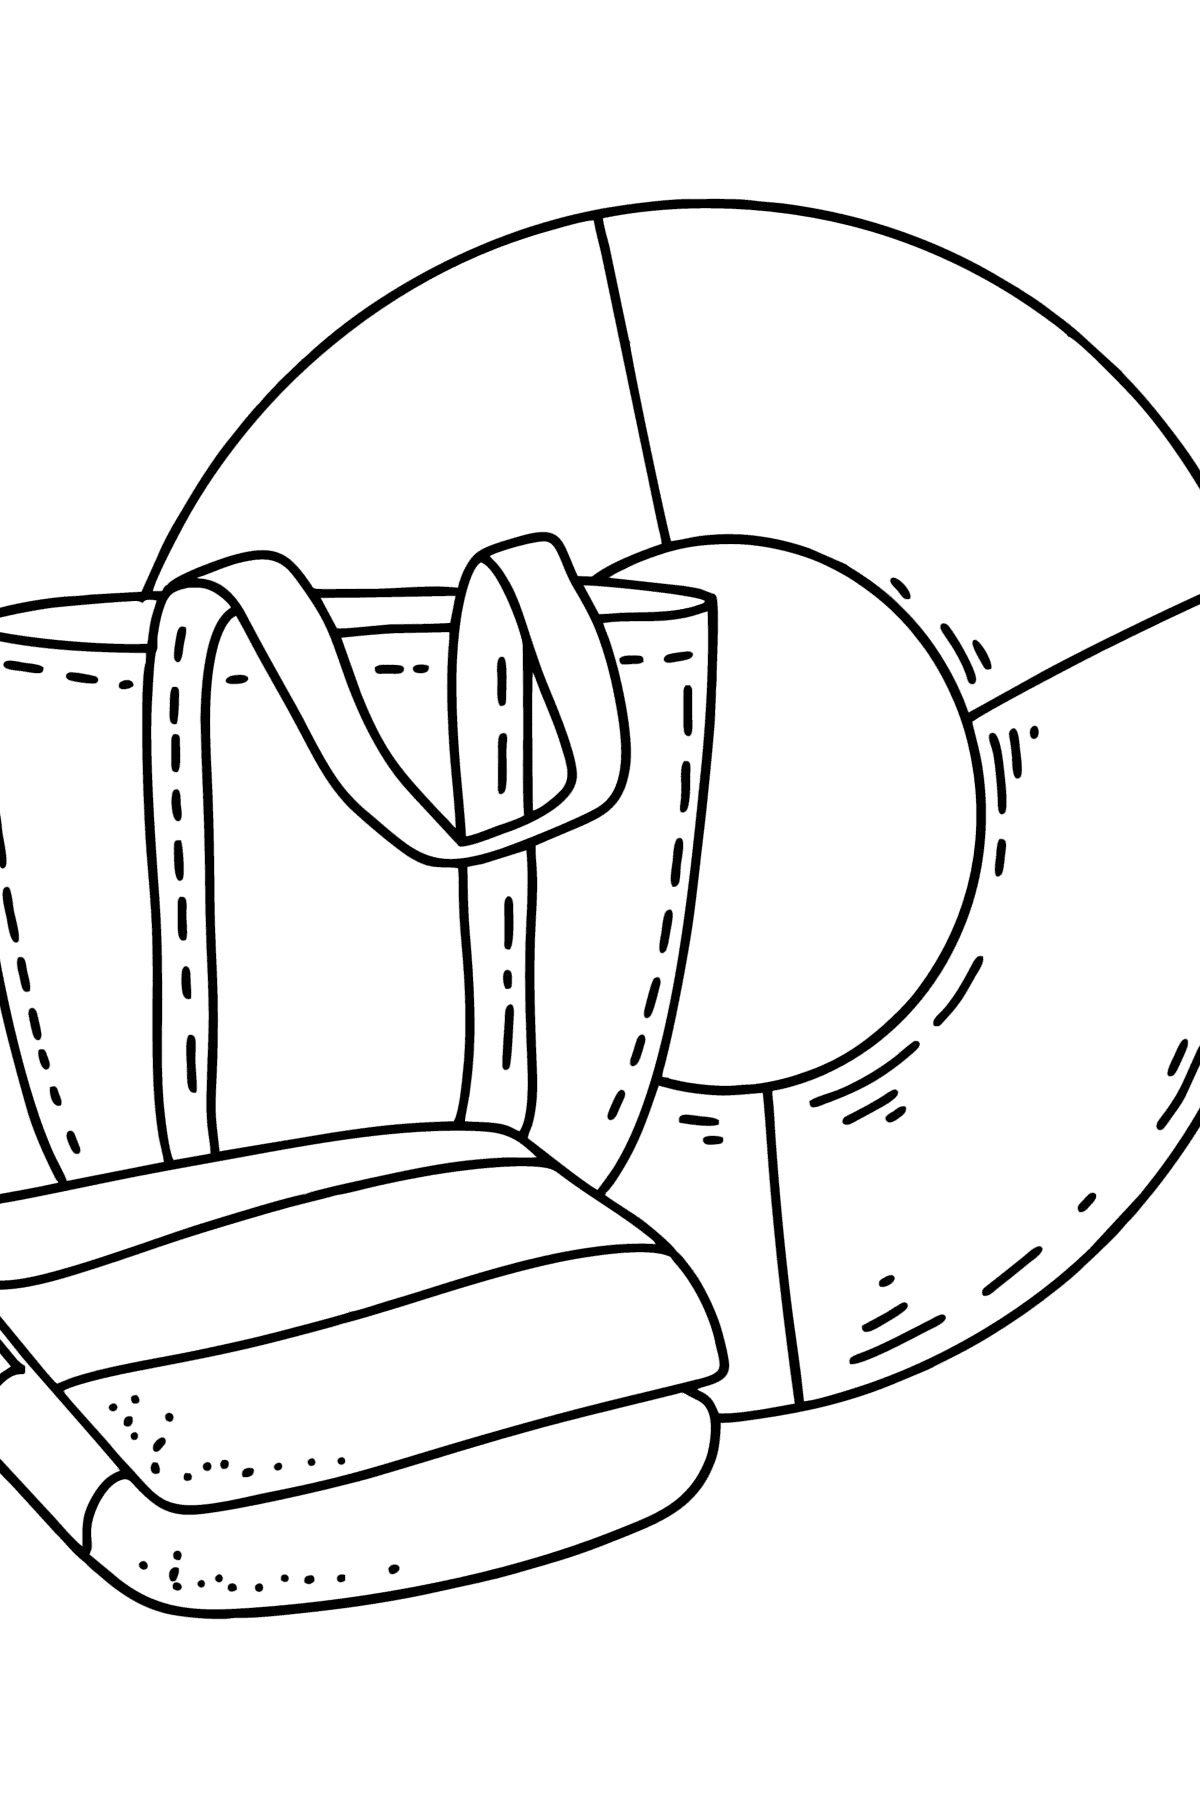 Coloring page Beach: bag and lifebuoy - Coloring Pages for Kids